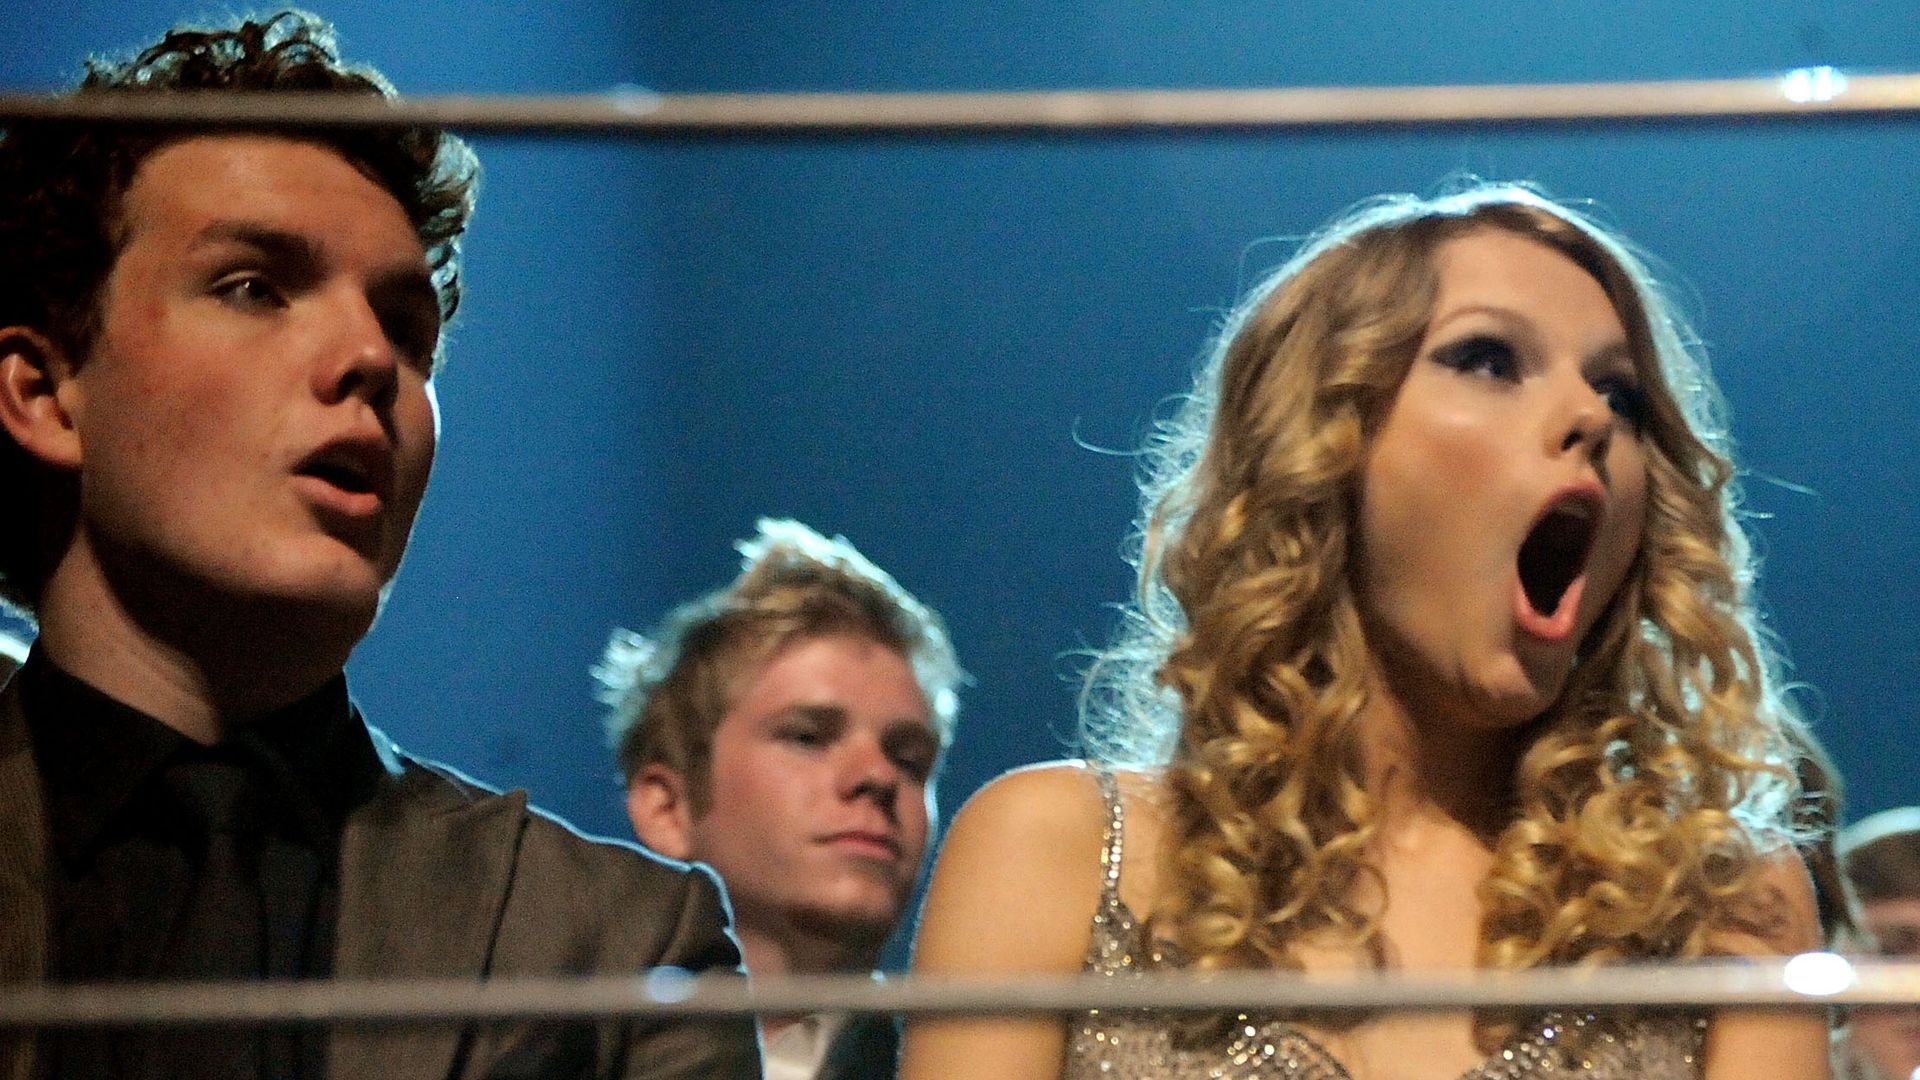 Taylor and Austin sat, mouths open in shock